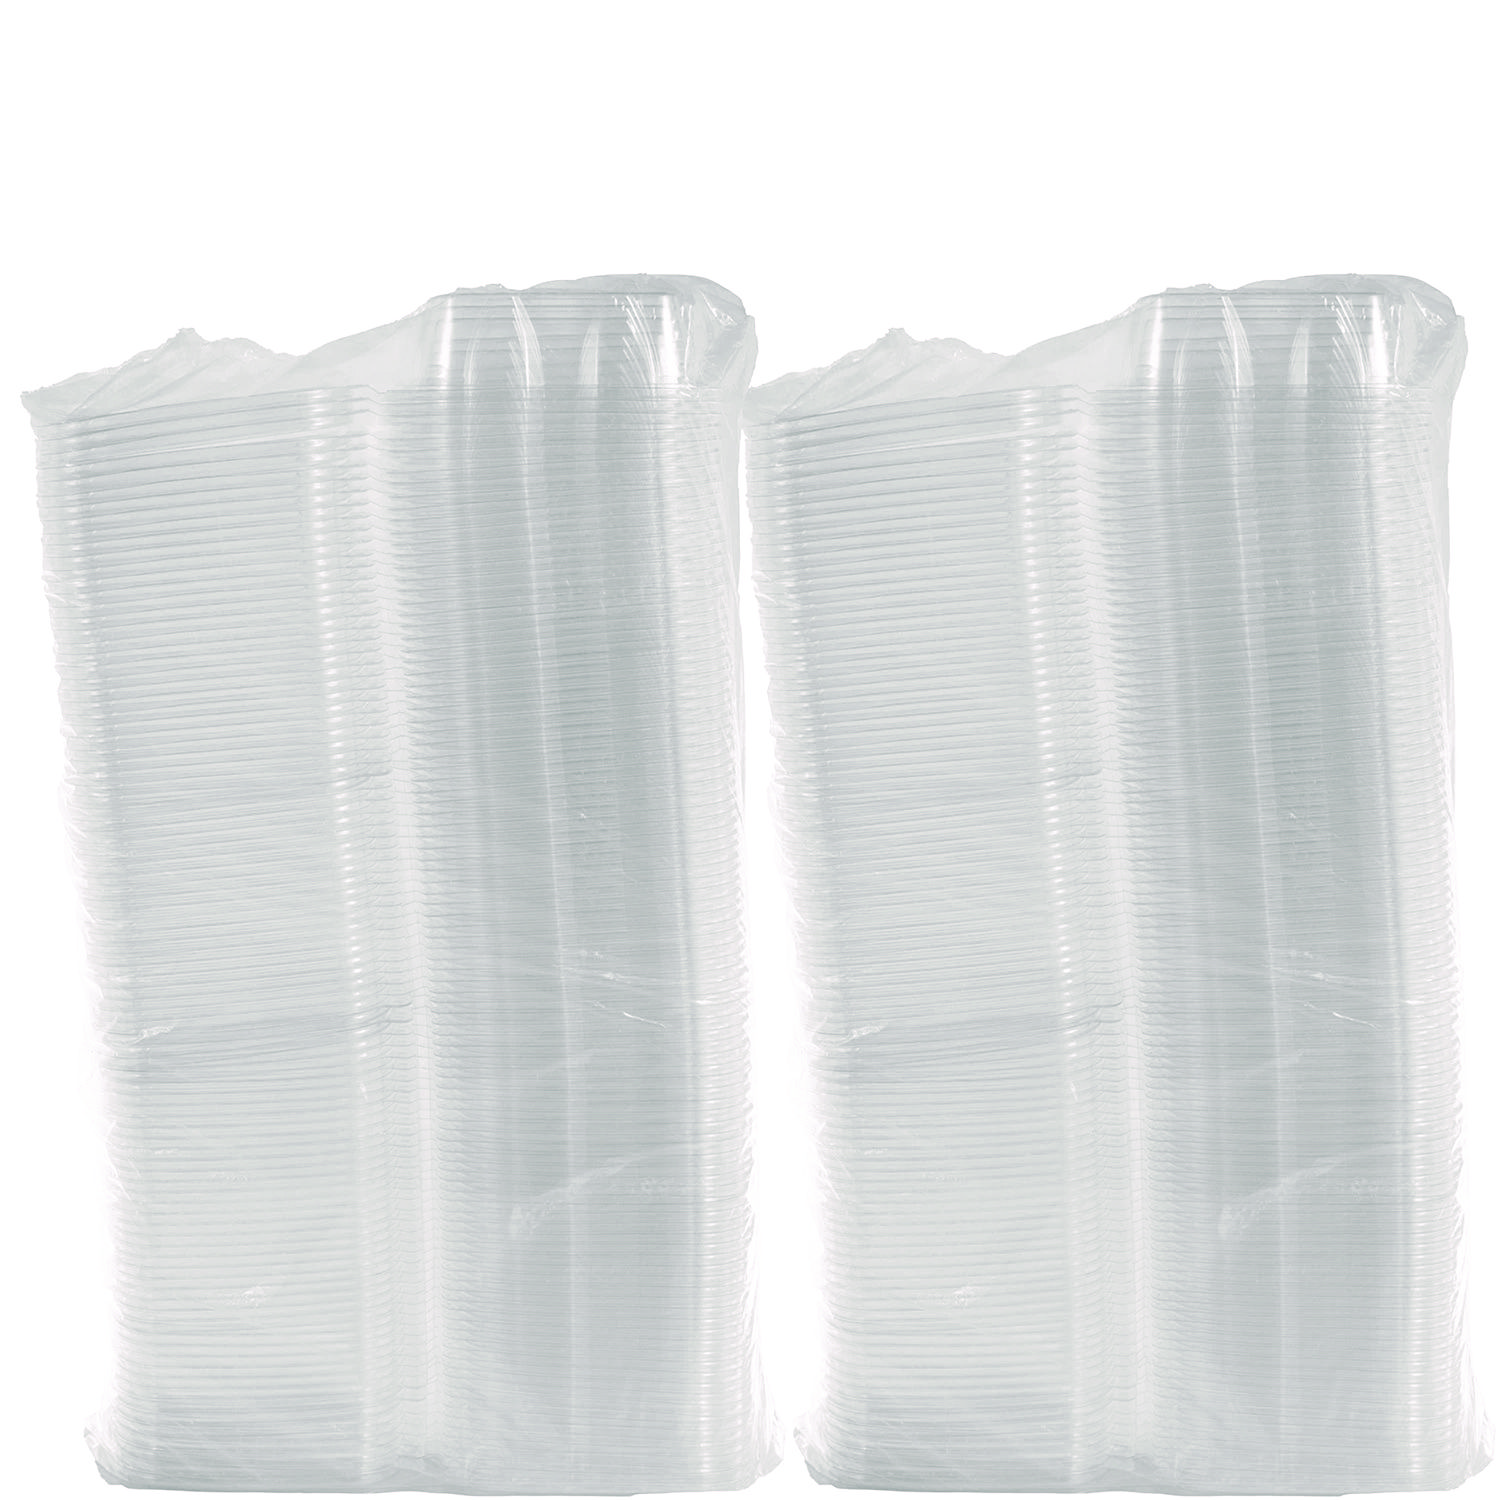 Dart ClearPac Container 6.4 x 2.6 x 7.1 32 oz Clear 200/Carton